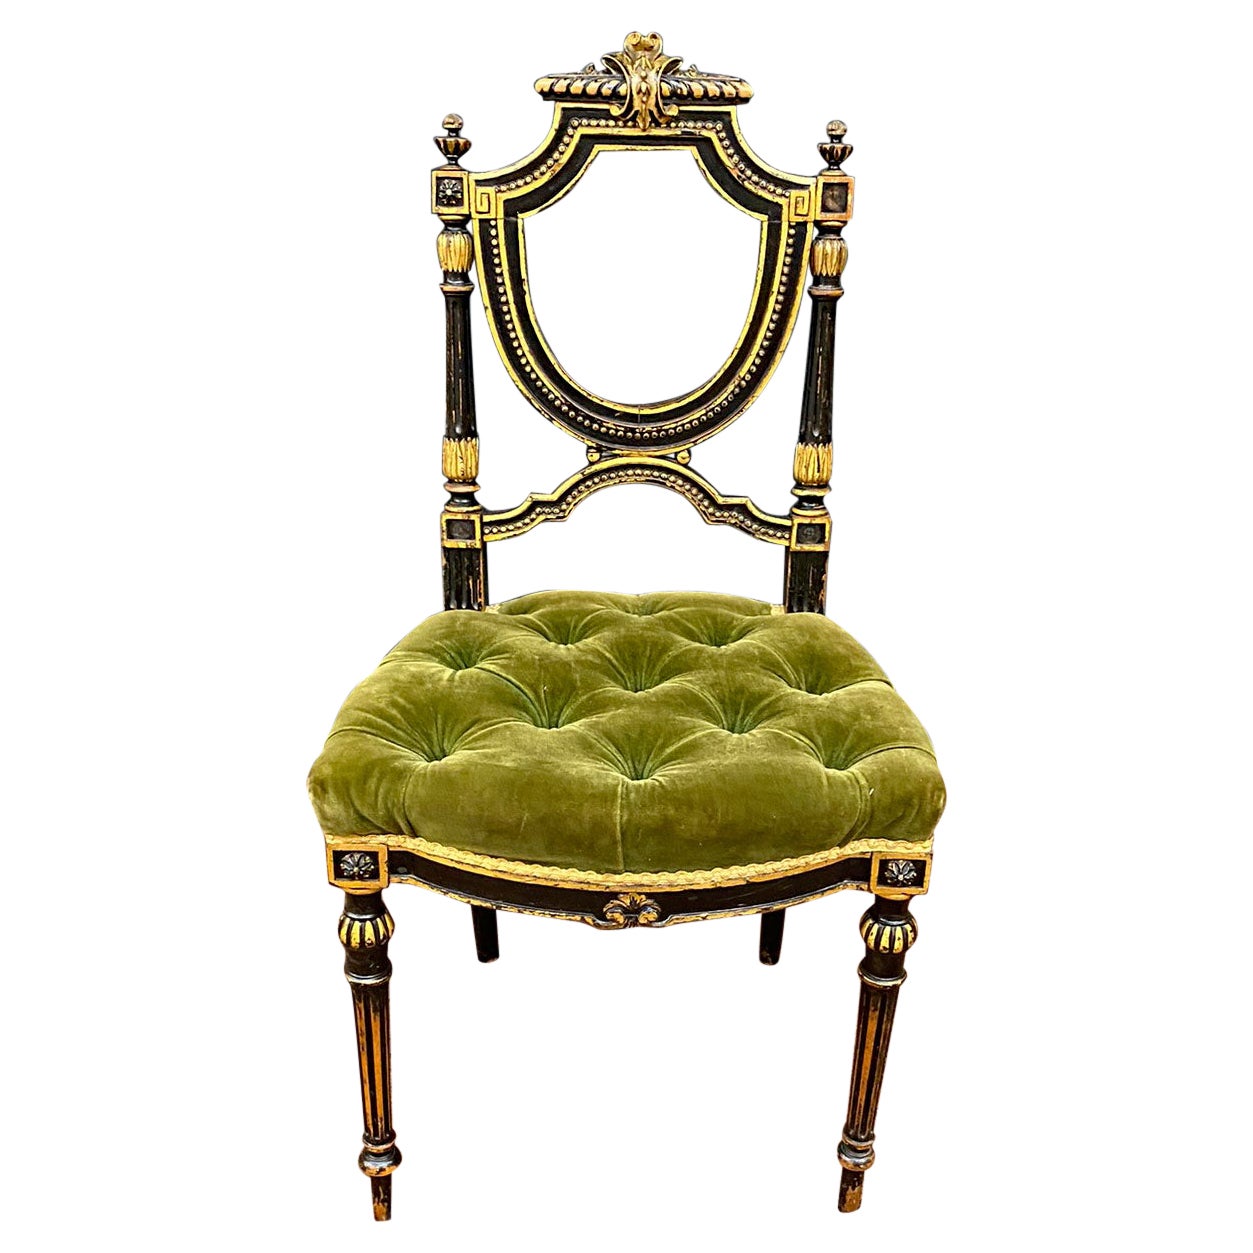 Charming Napoleon III Period Chair, in Blackened Pear and Velvet